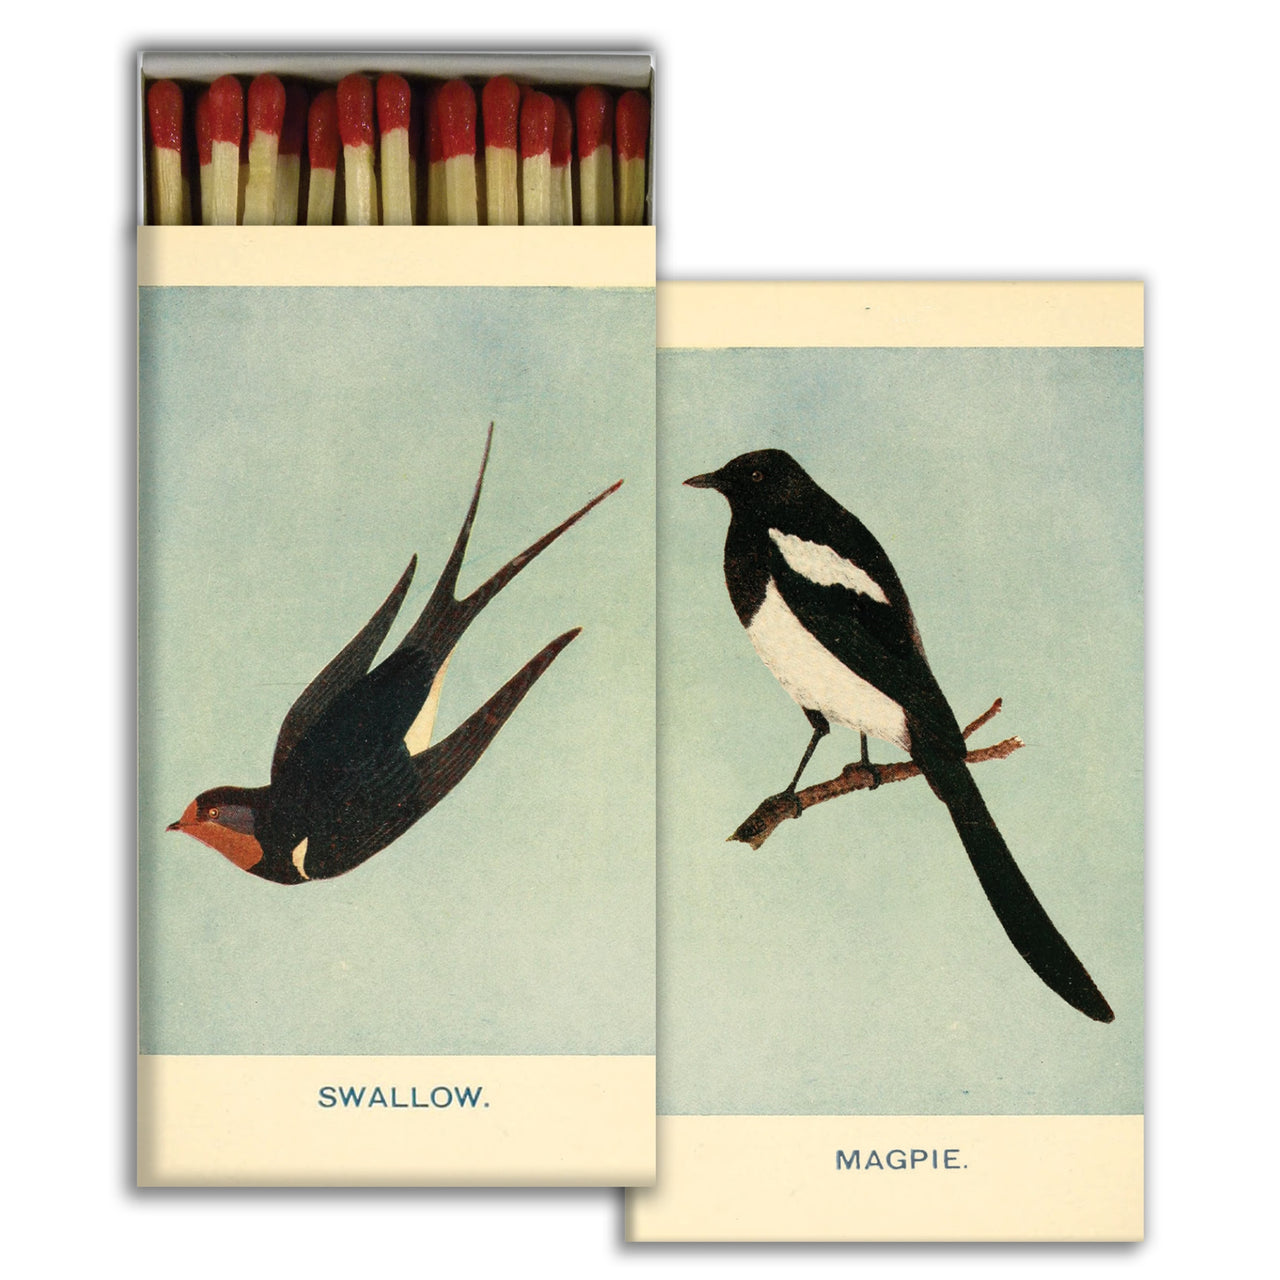 Swallow and Magpie Matches